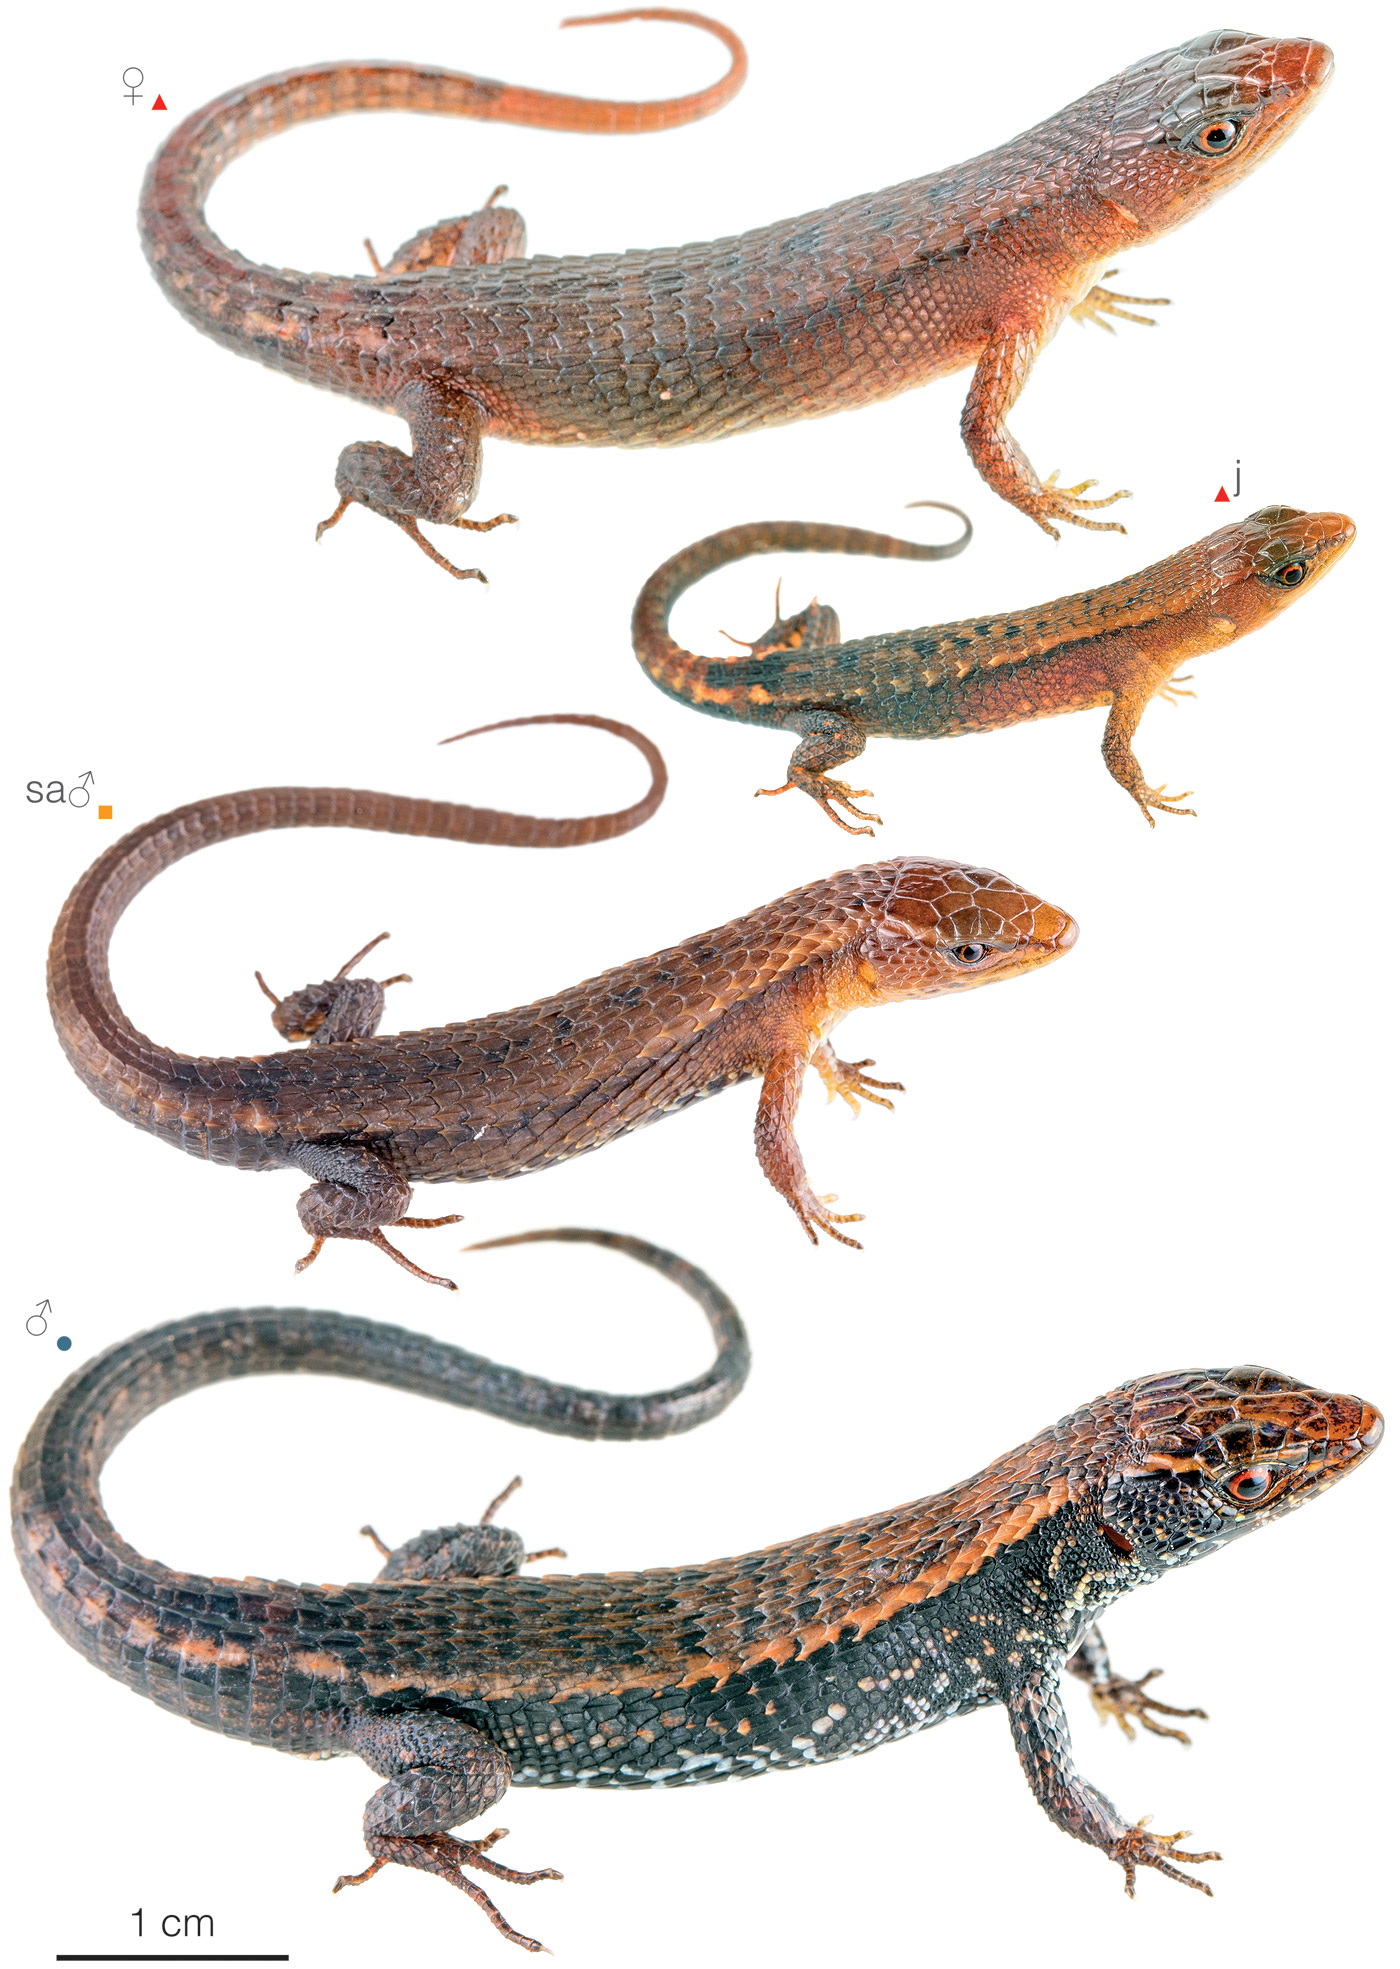 Figure showing variation among individuals of Alopoglossus buckleyi